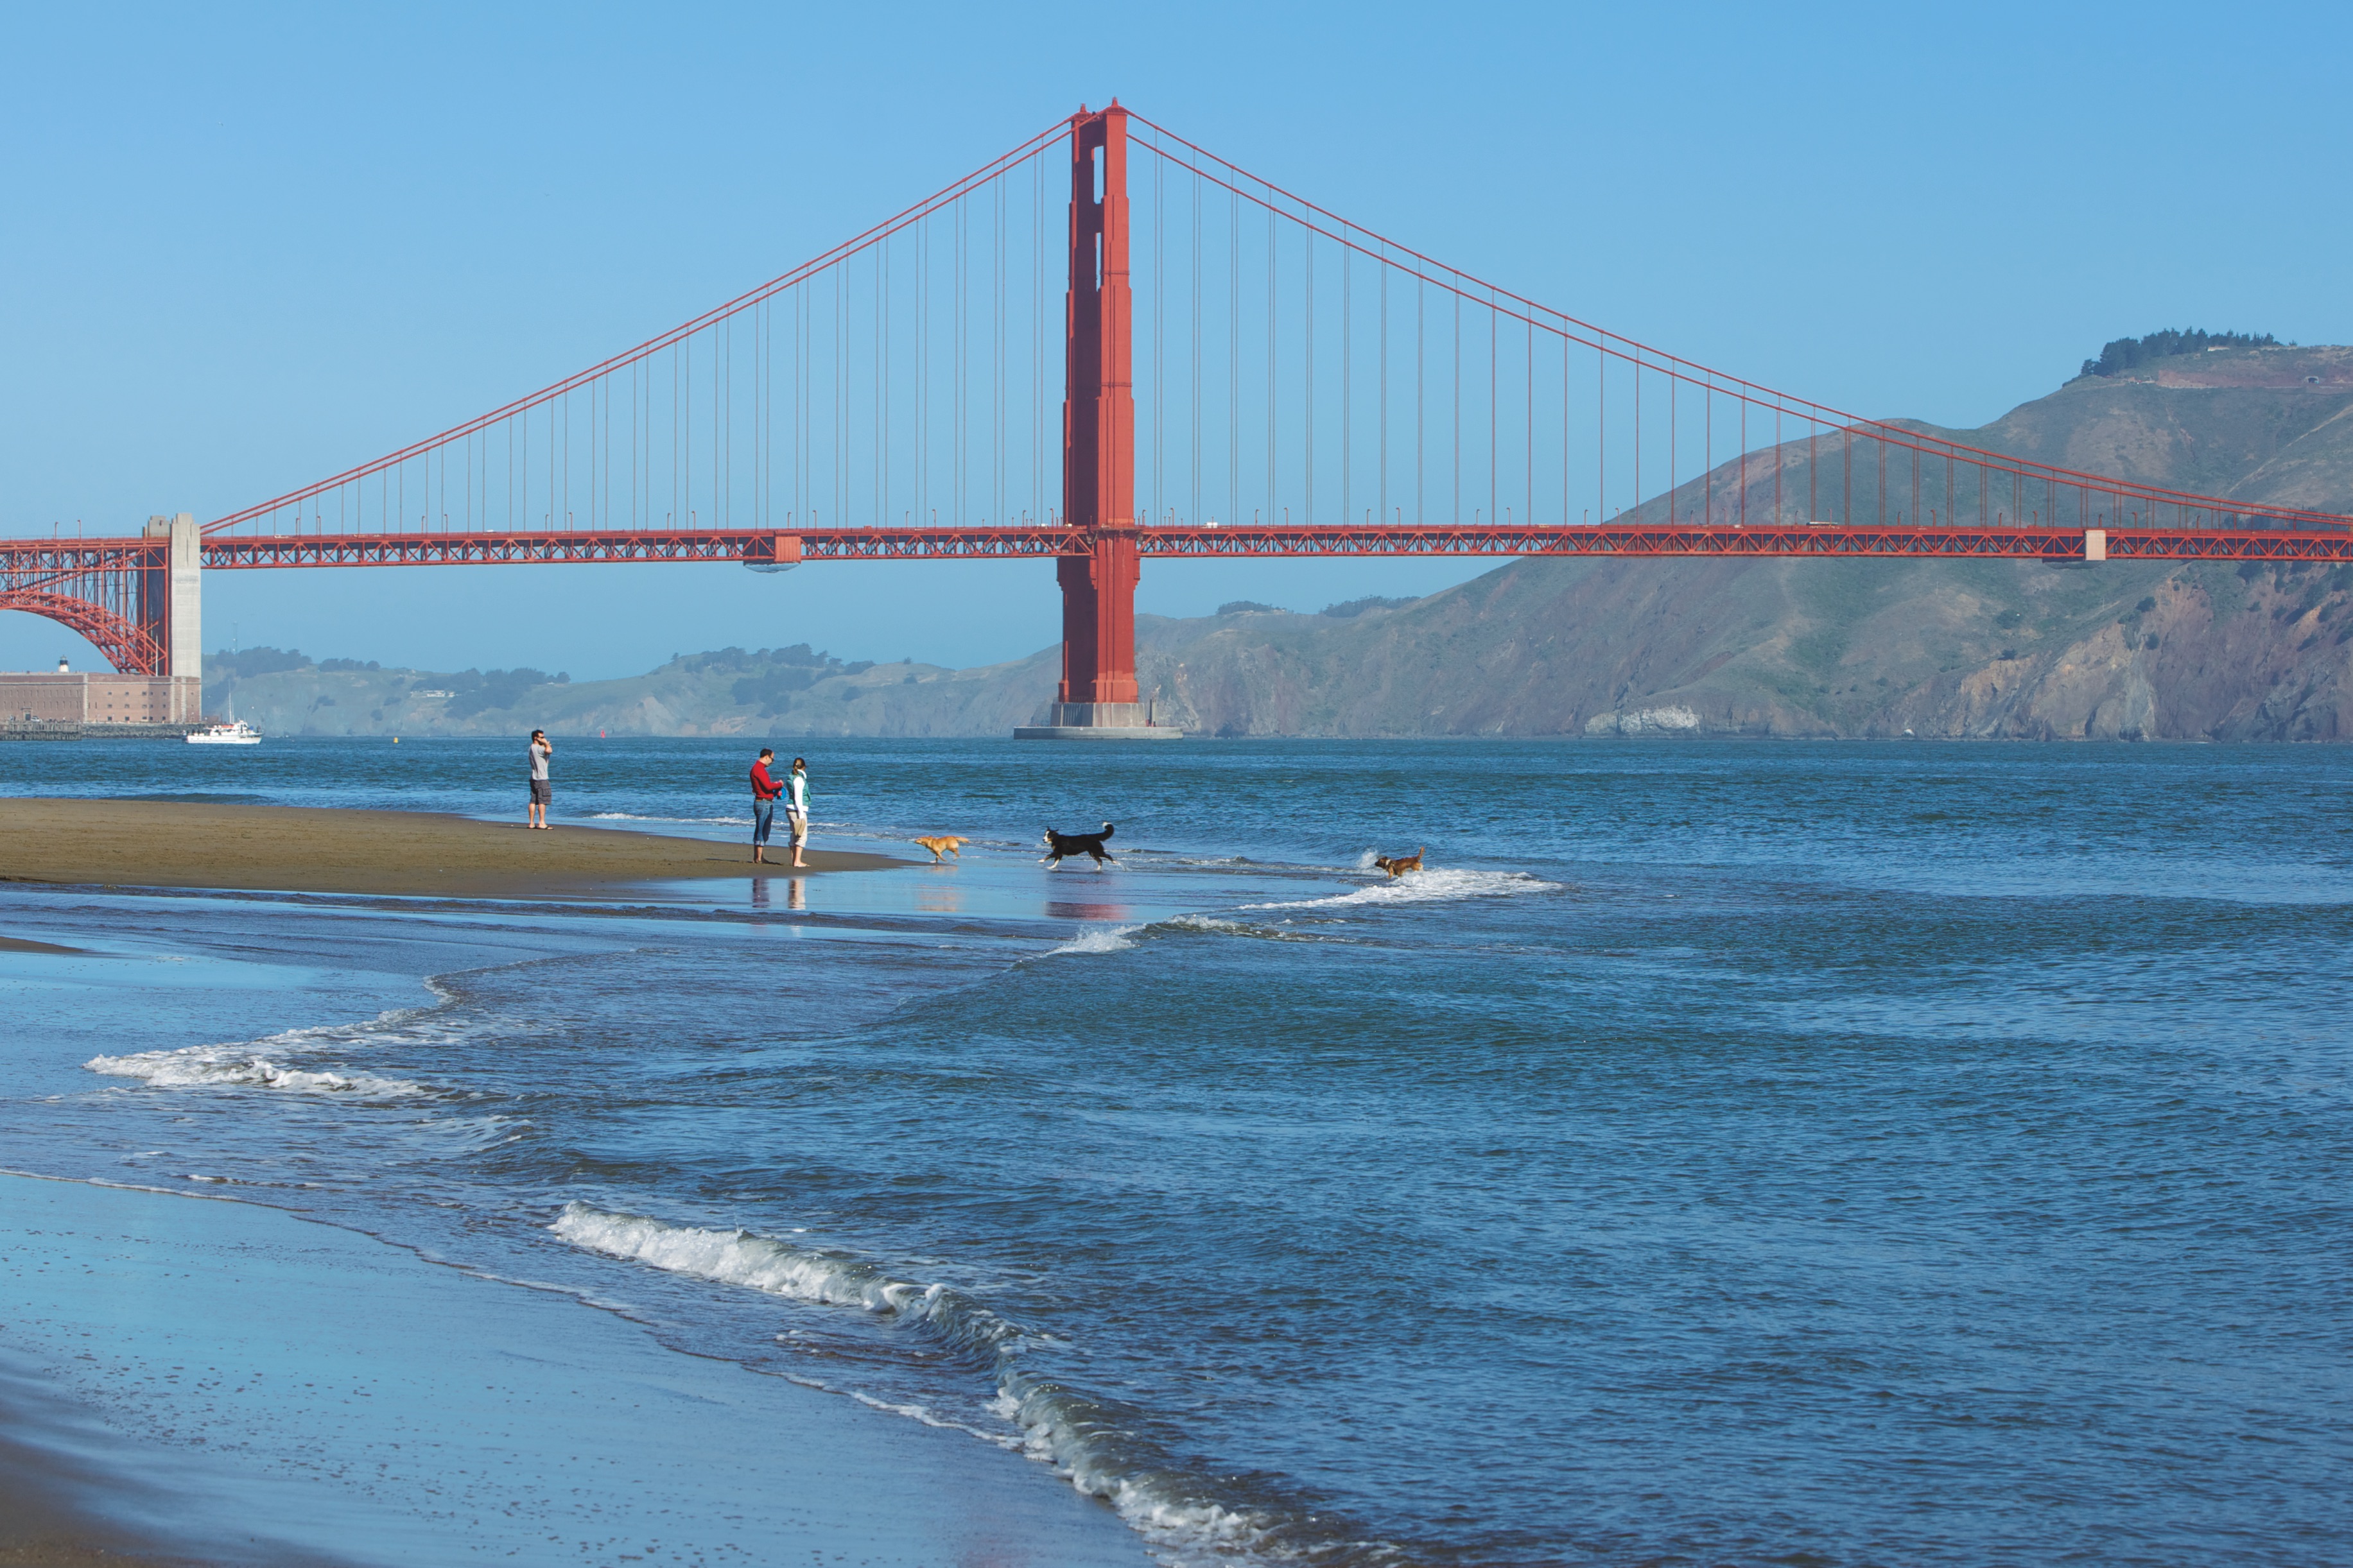 The Presidio of San Francisco, part of the Golden Gate National Recreation Area, offers 24 miles of trails and dog-friendly beaches, including Crissy Field.